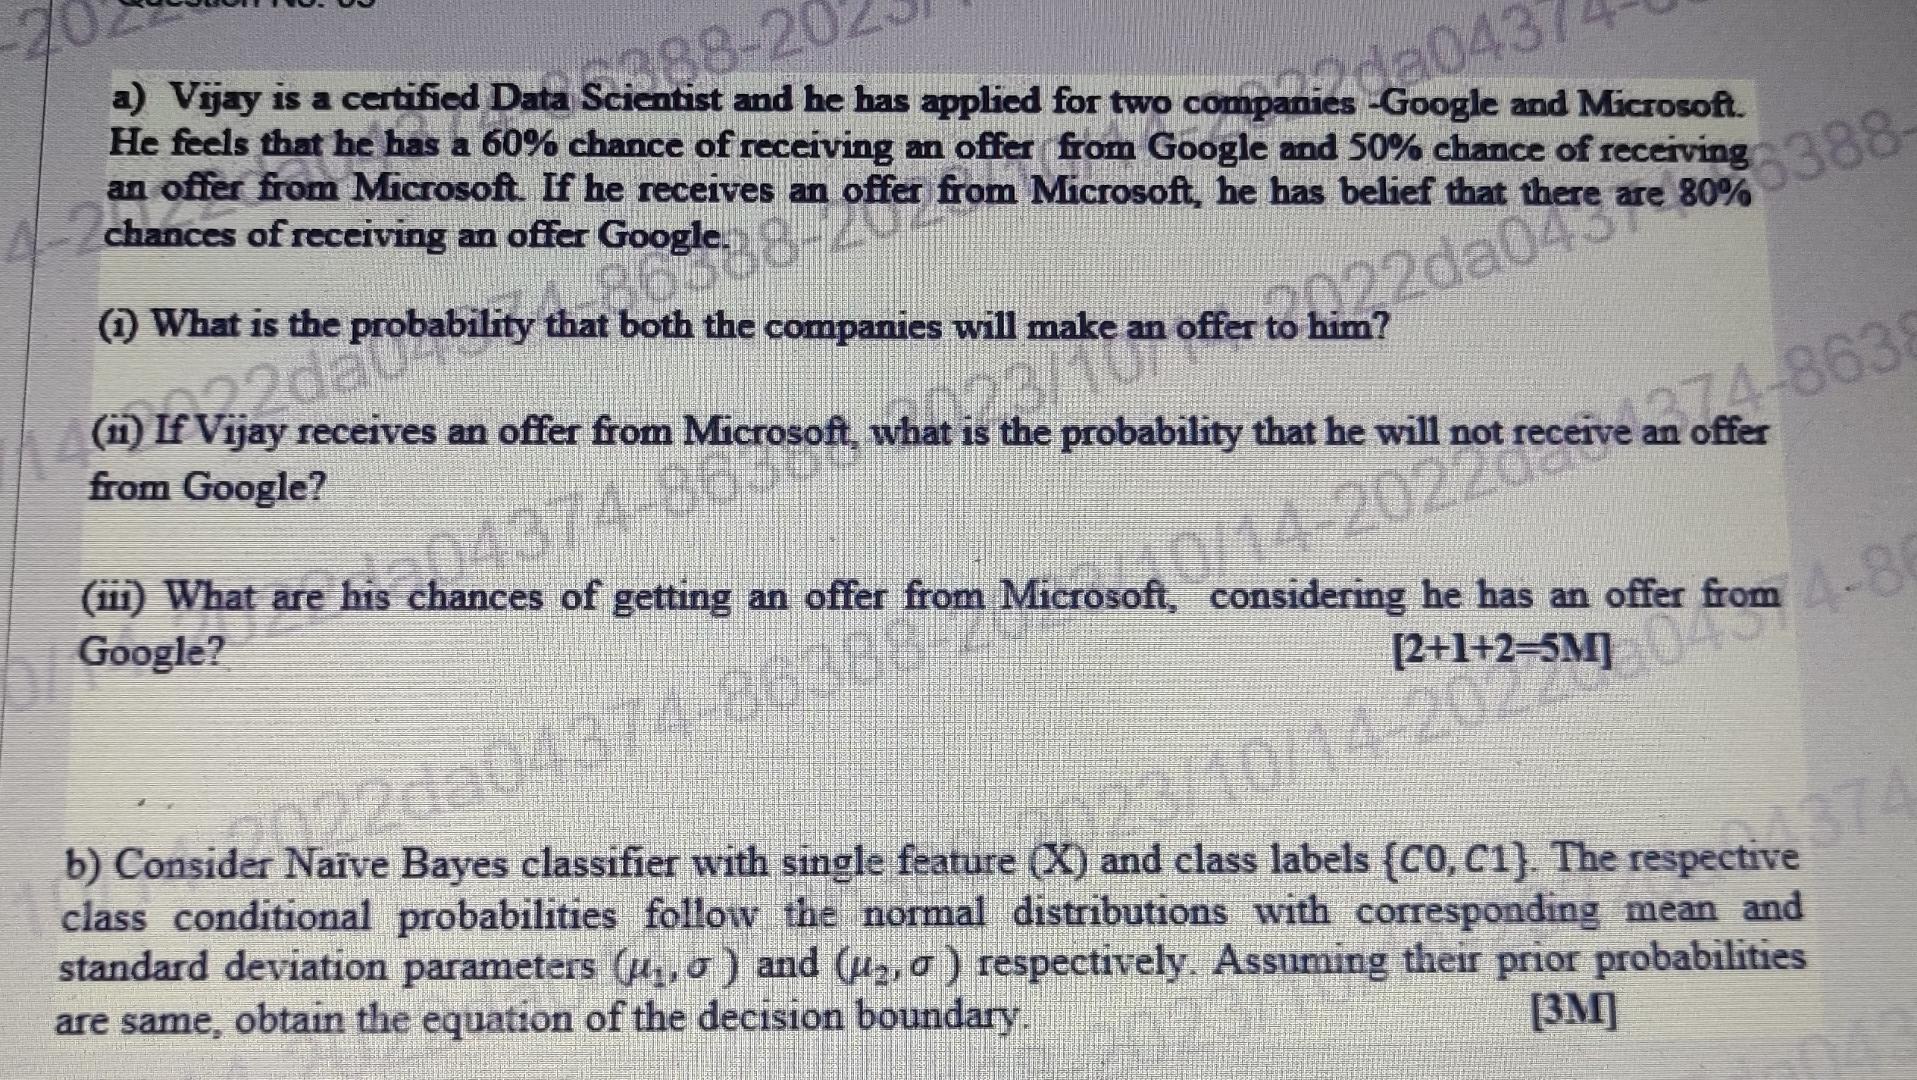 a) Vijay is a certified Data Scientist and he has applied for two companies -Google and Microsoft. an offer